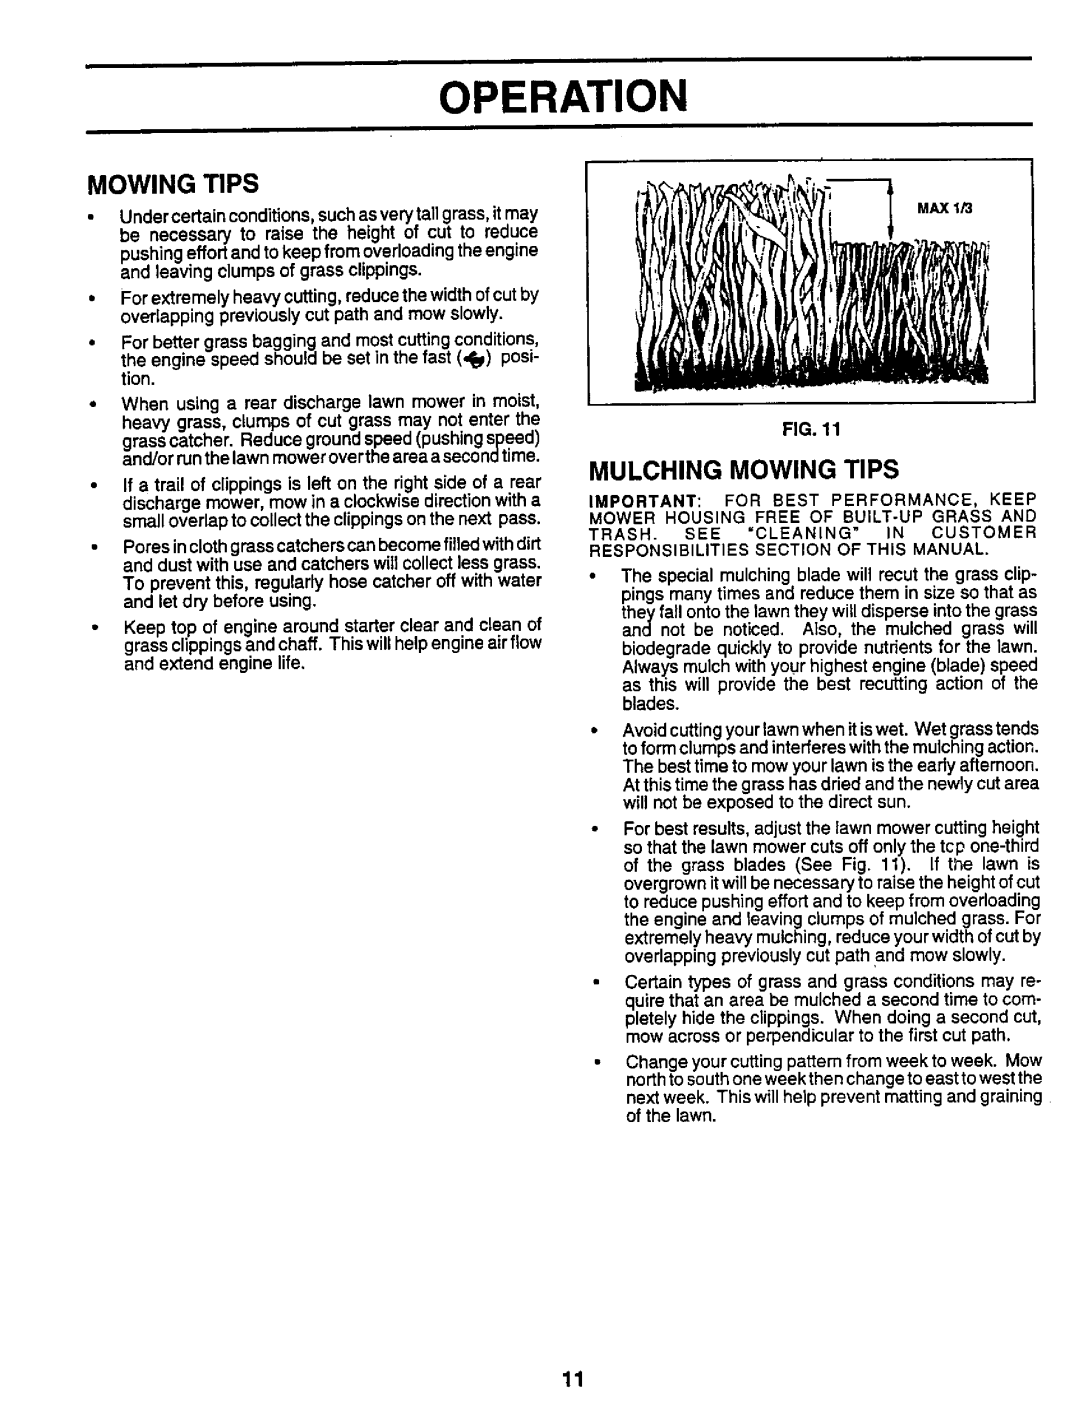 Sears 917.373981 owner manual Operation, Mulching Mowing Tips 